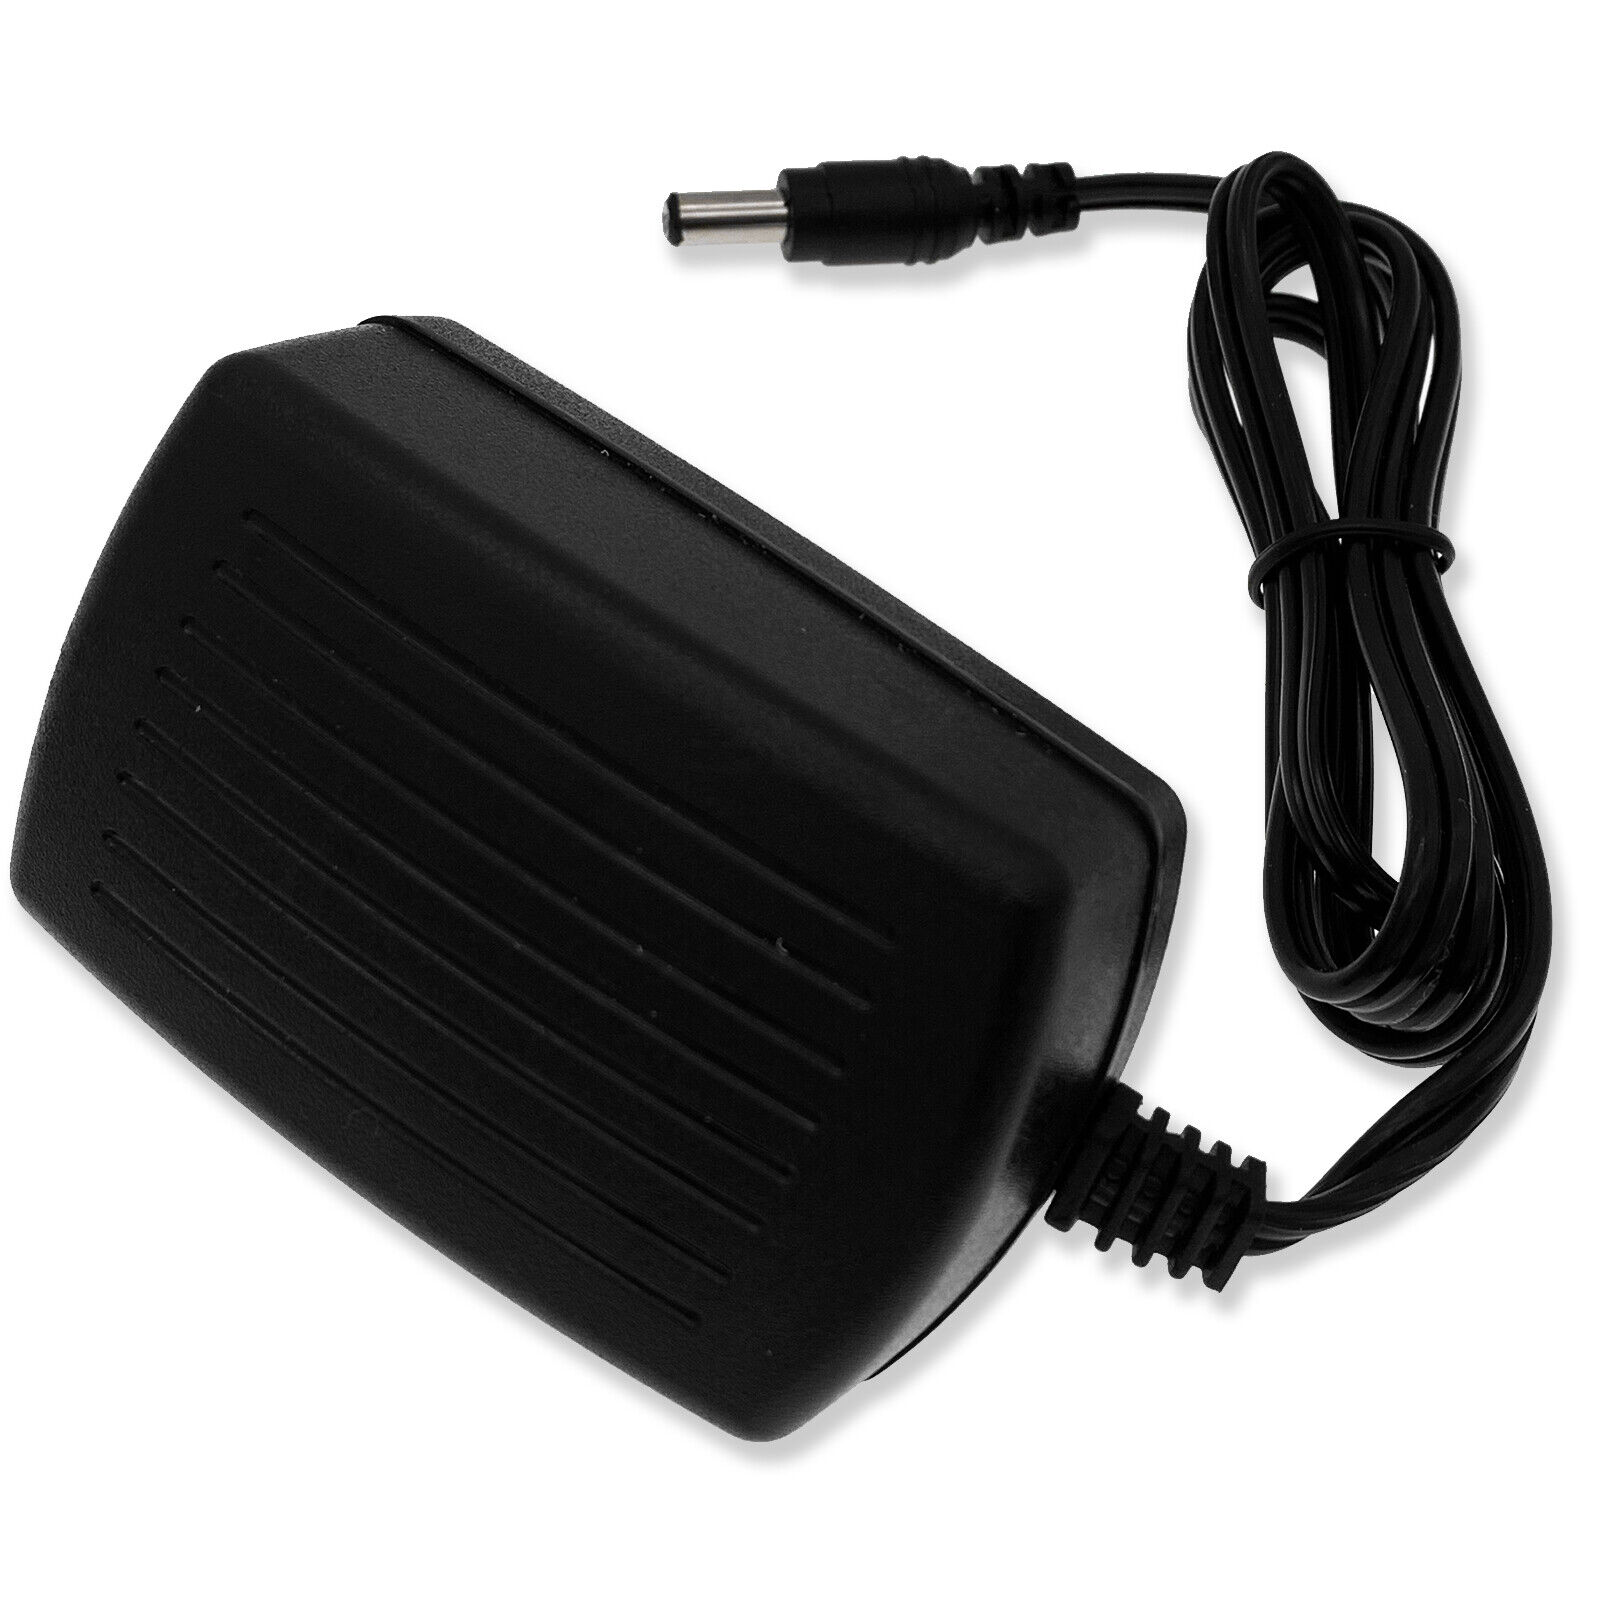 12V AC Adapter For Western Digital WD My Book 3TB WDBFJK0030HBK WA-24E12 WA24E12 MPN Does Not Apply Output Voltage 12